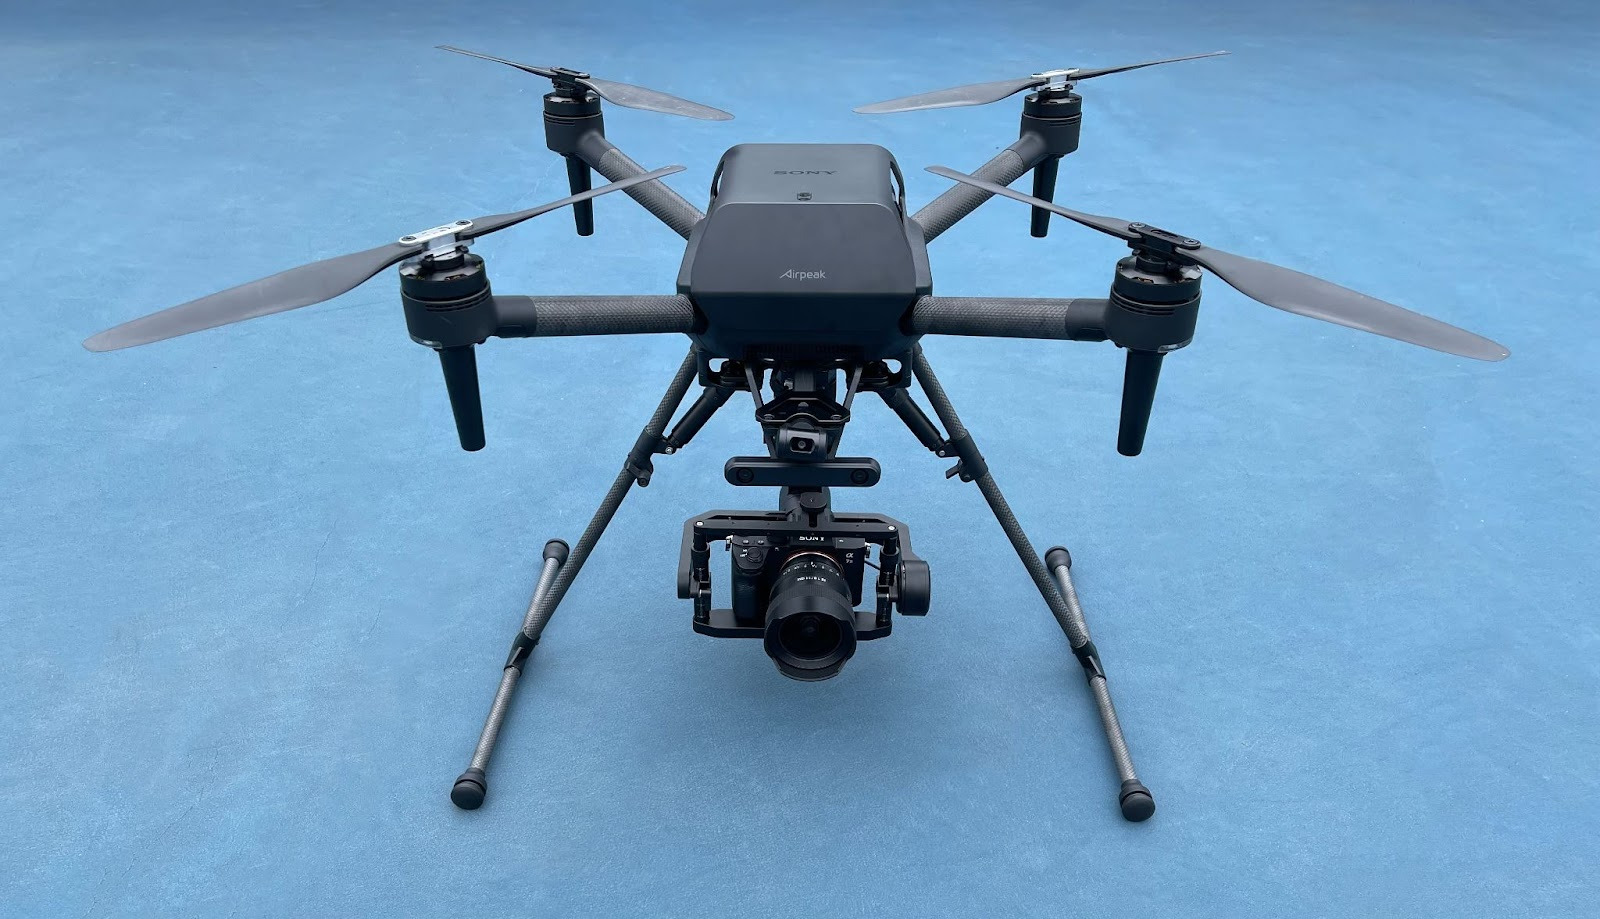 Sony’s Airpeak S1 Drone Review: It has limitations but it's improving